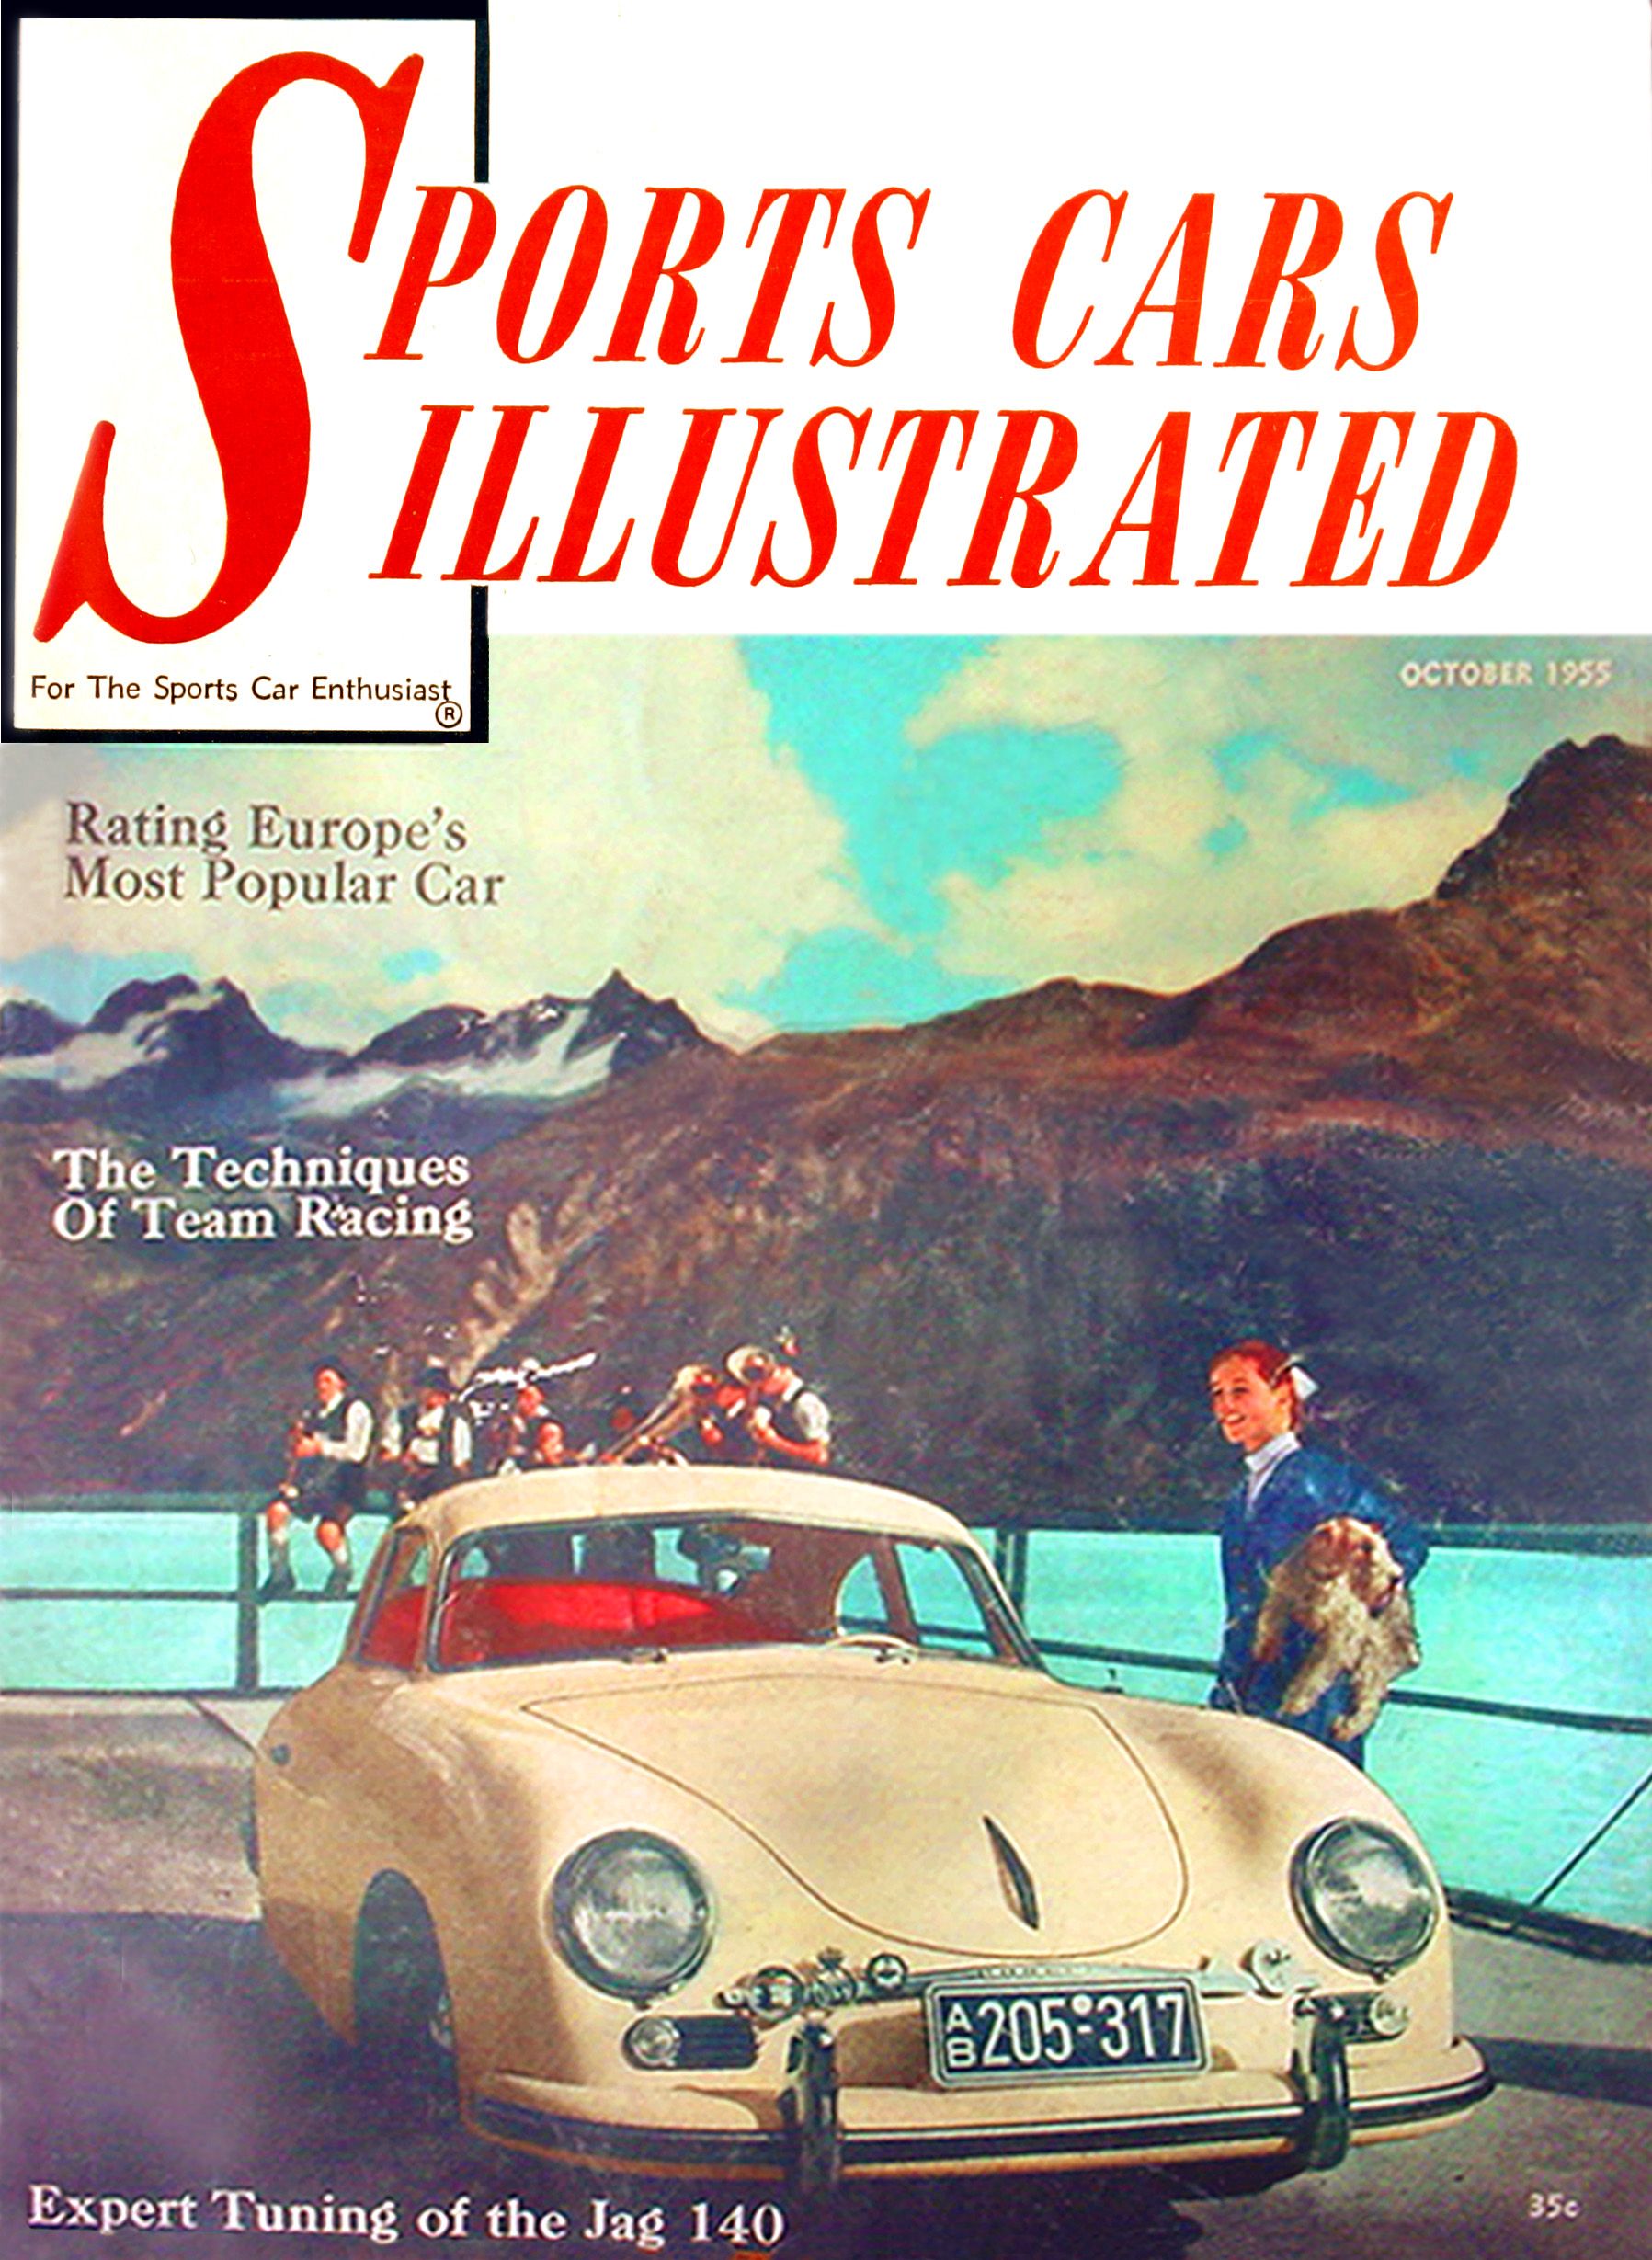 1950s Sports Cars Illustrated Magazine Covers